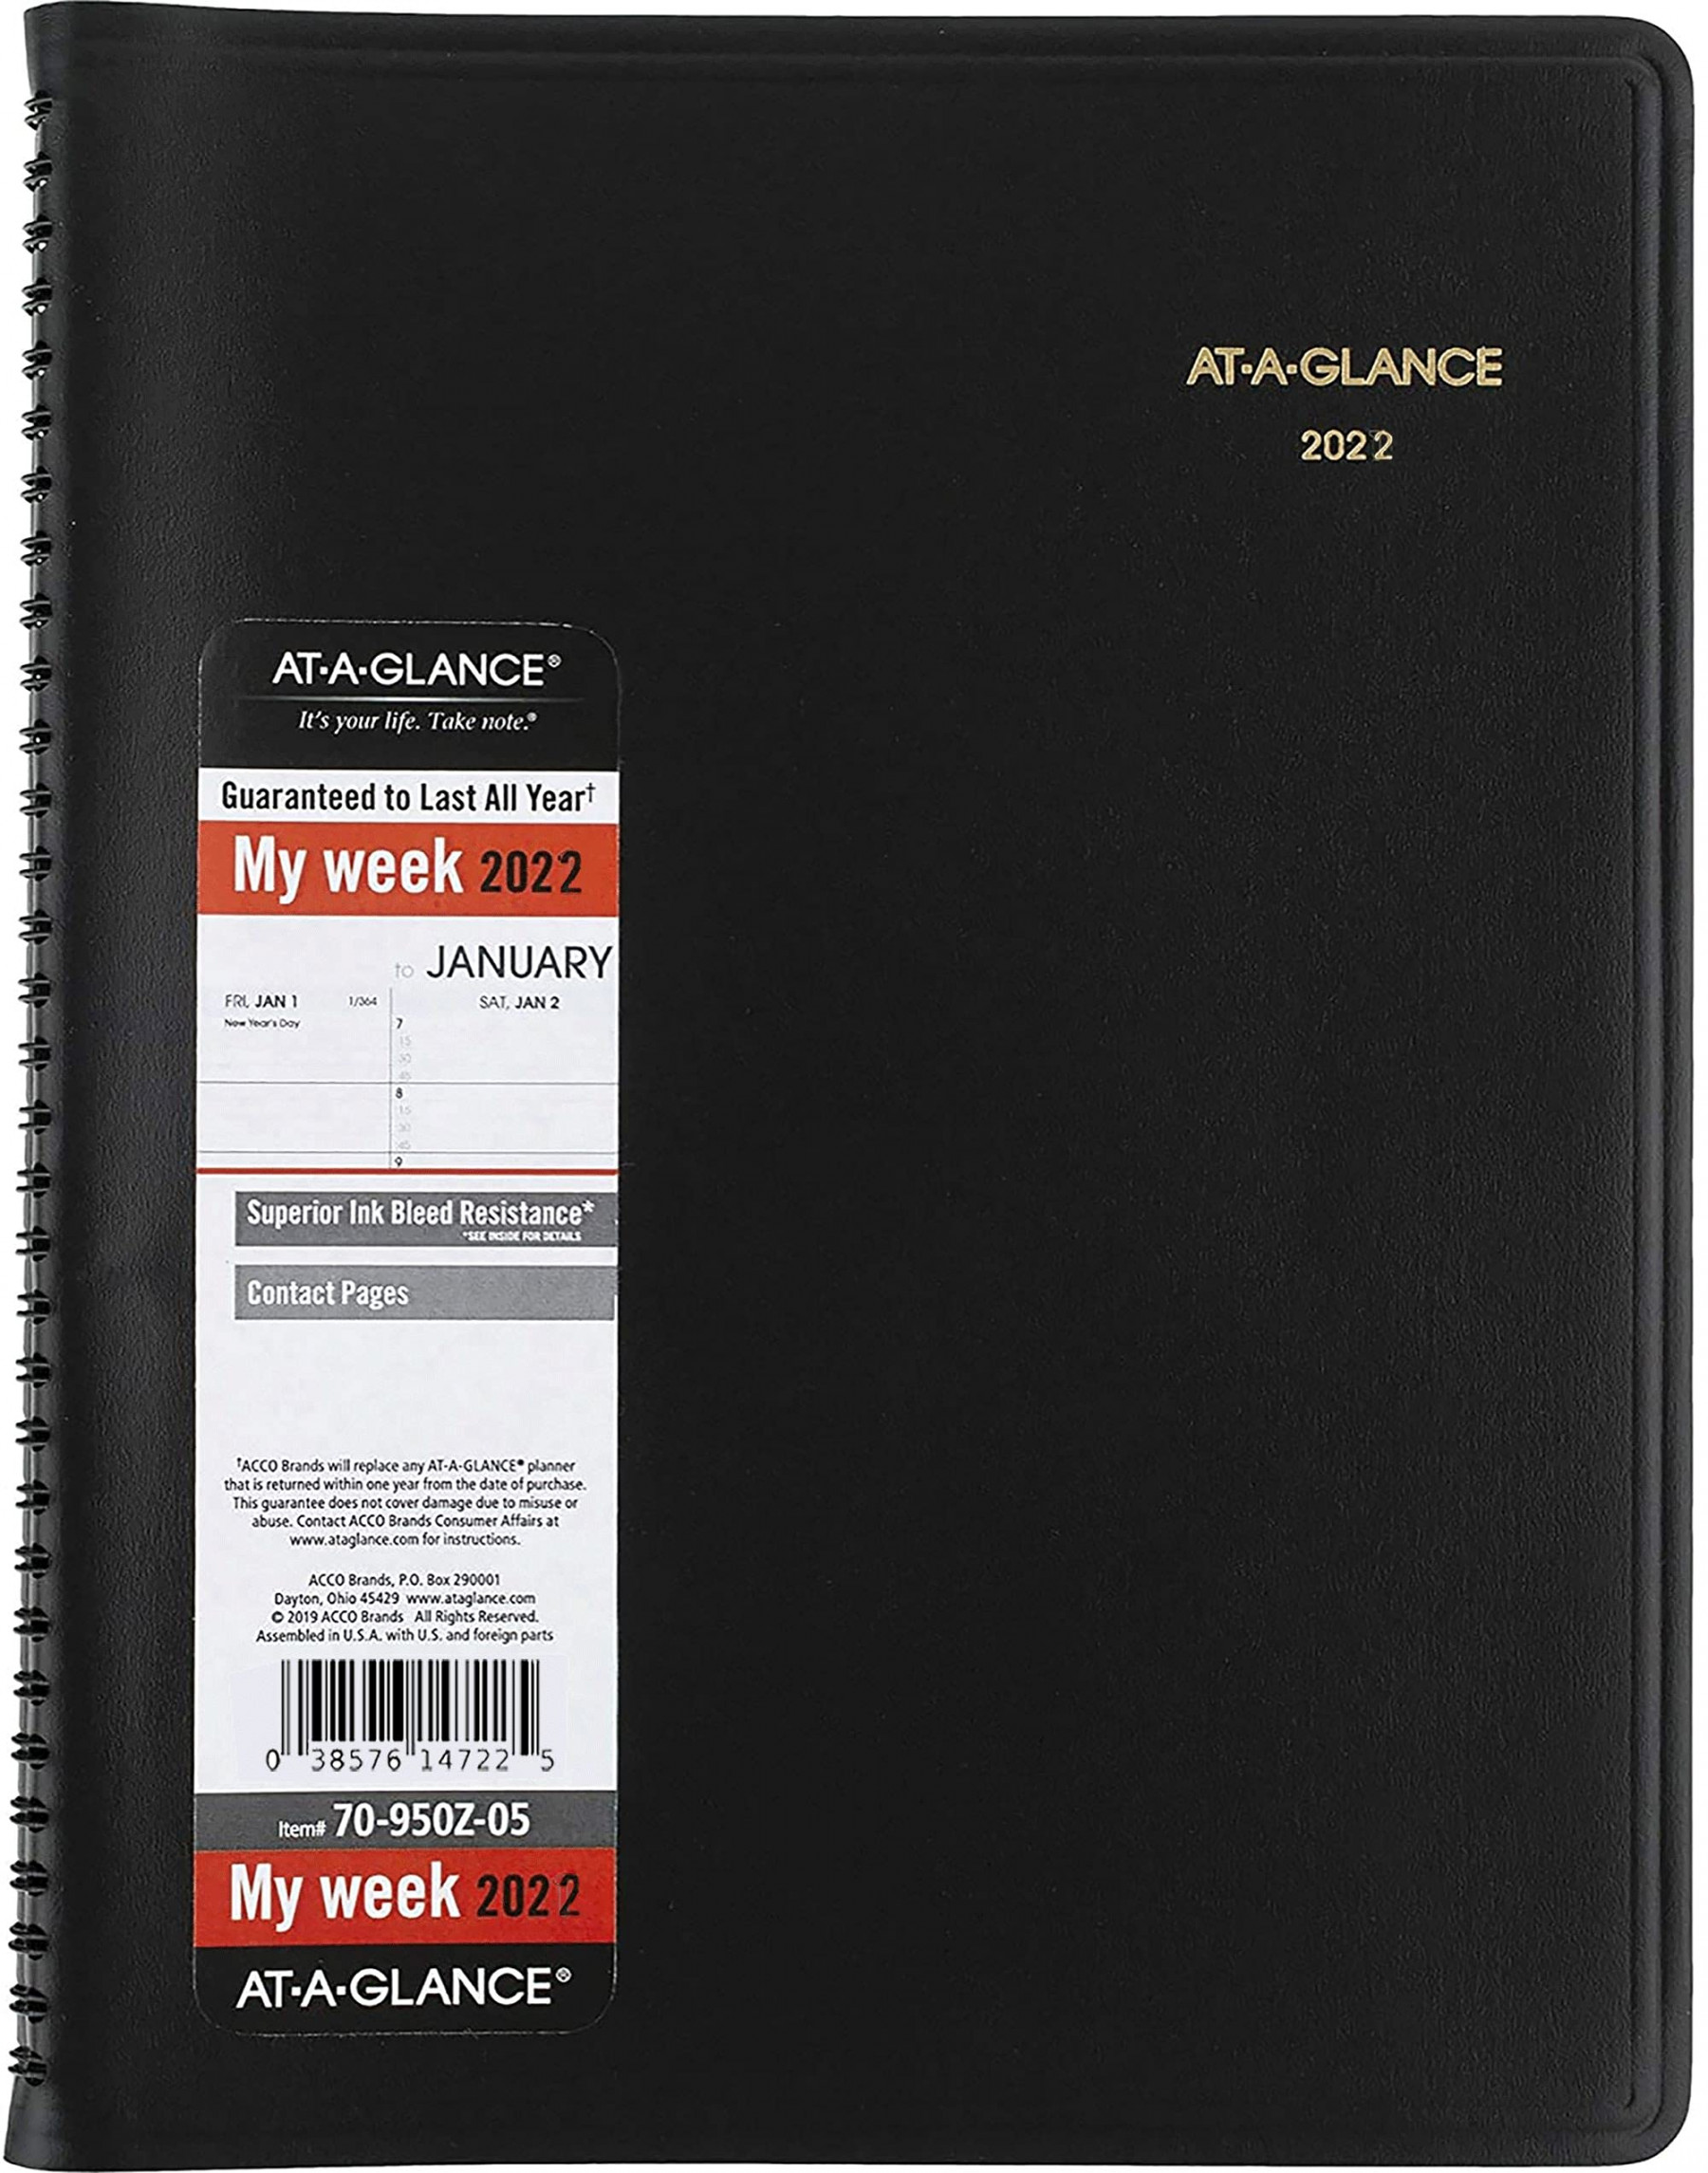 Weekly Planner & Appointment Book By At A Glance - Large  /" X "  - Black - Professional SpSee more  Weekly Planner & Appointment Book